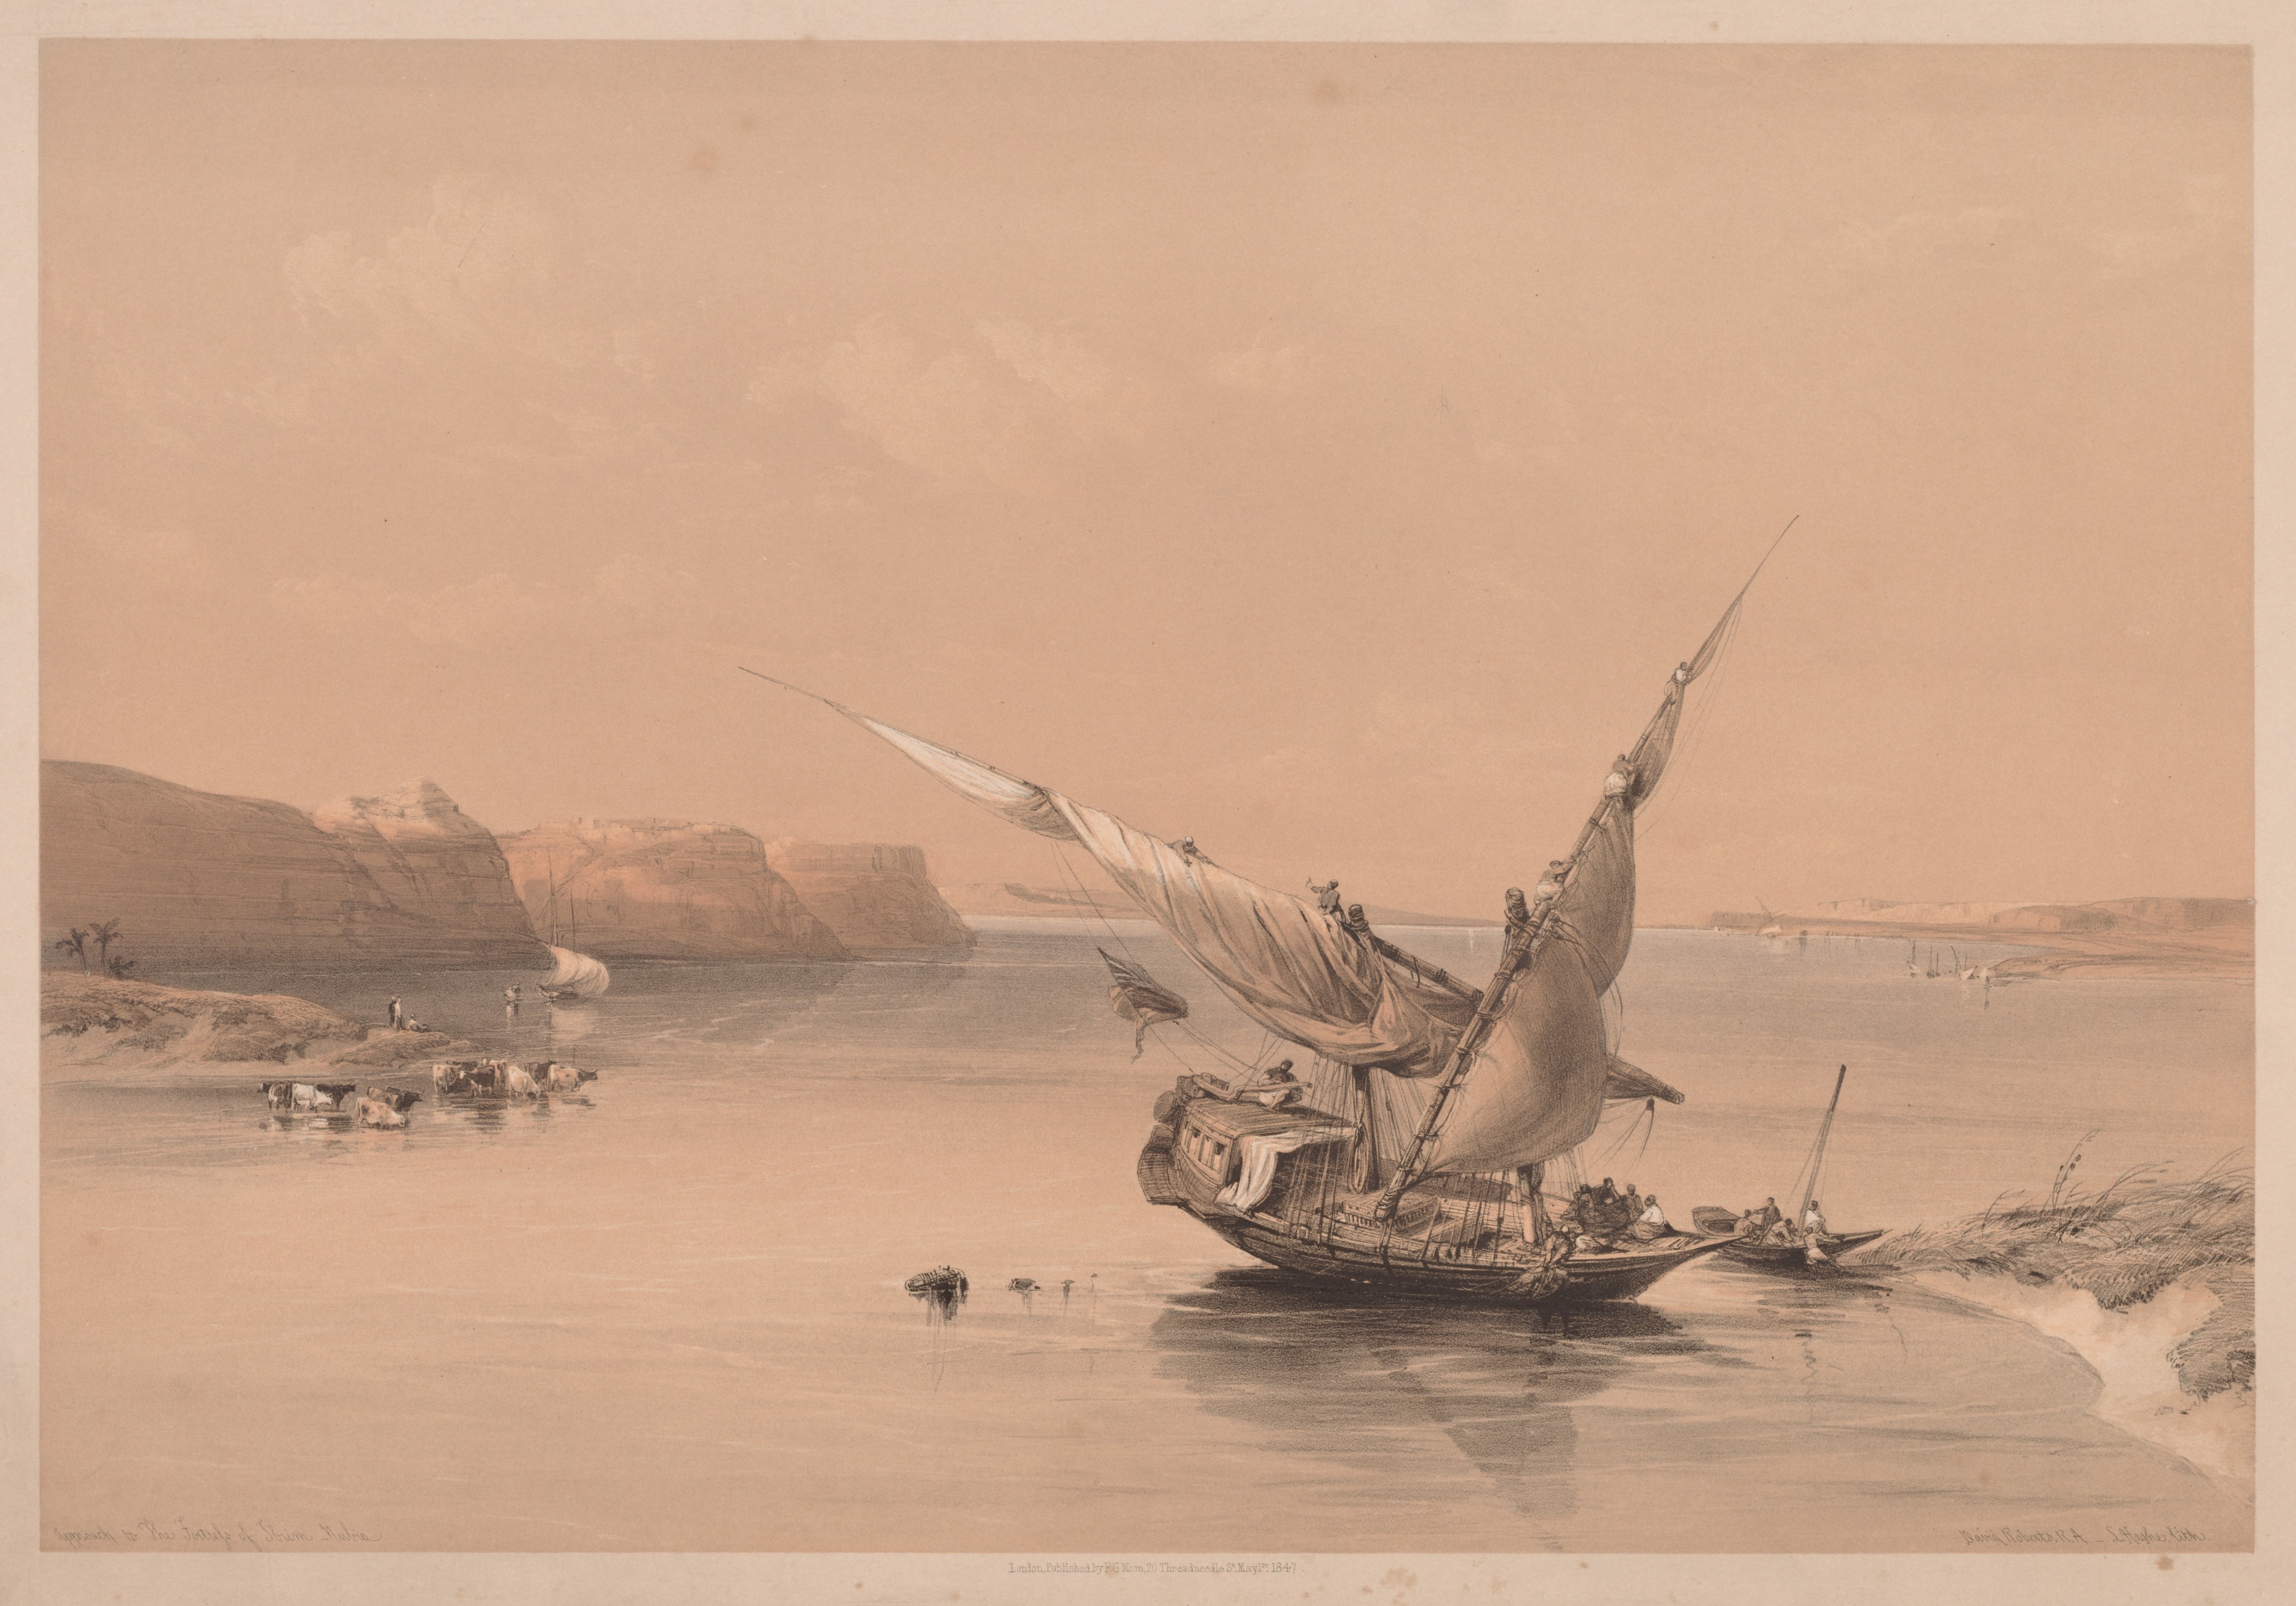 Egypt and Nubia:  Volume II - No. 6, Approach to the Fortress of Ibrim, Nubia